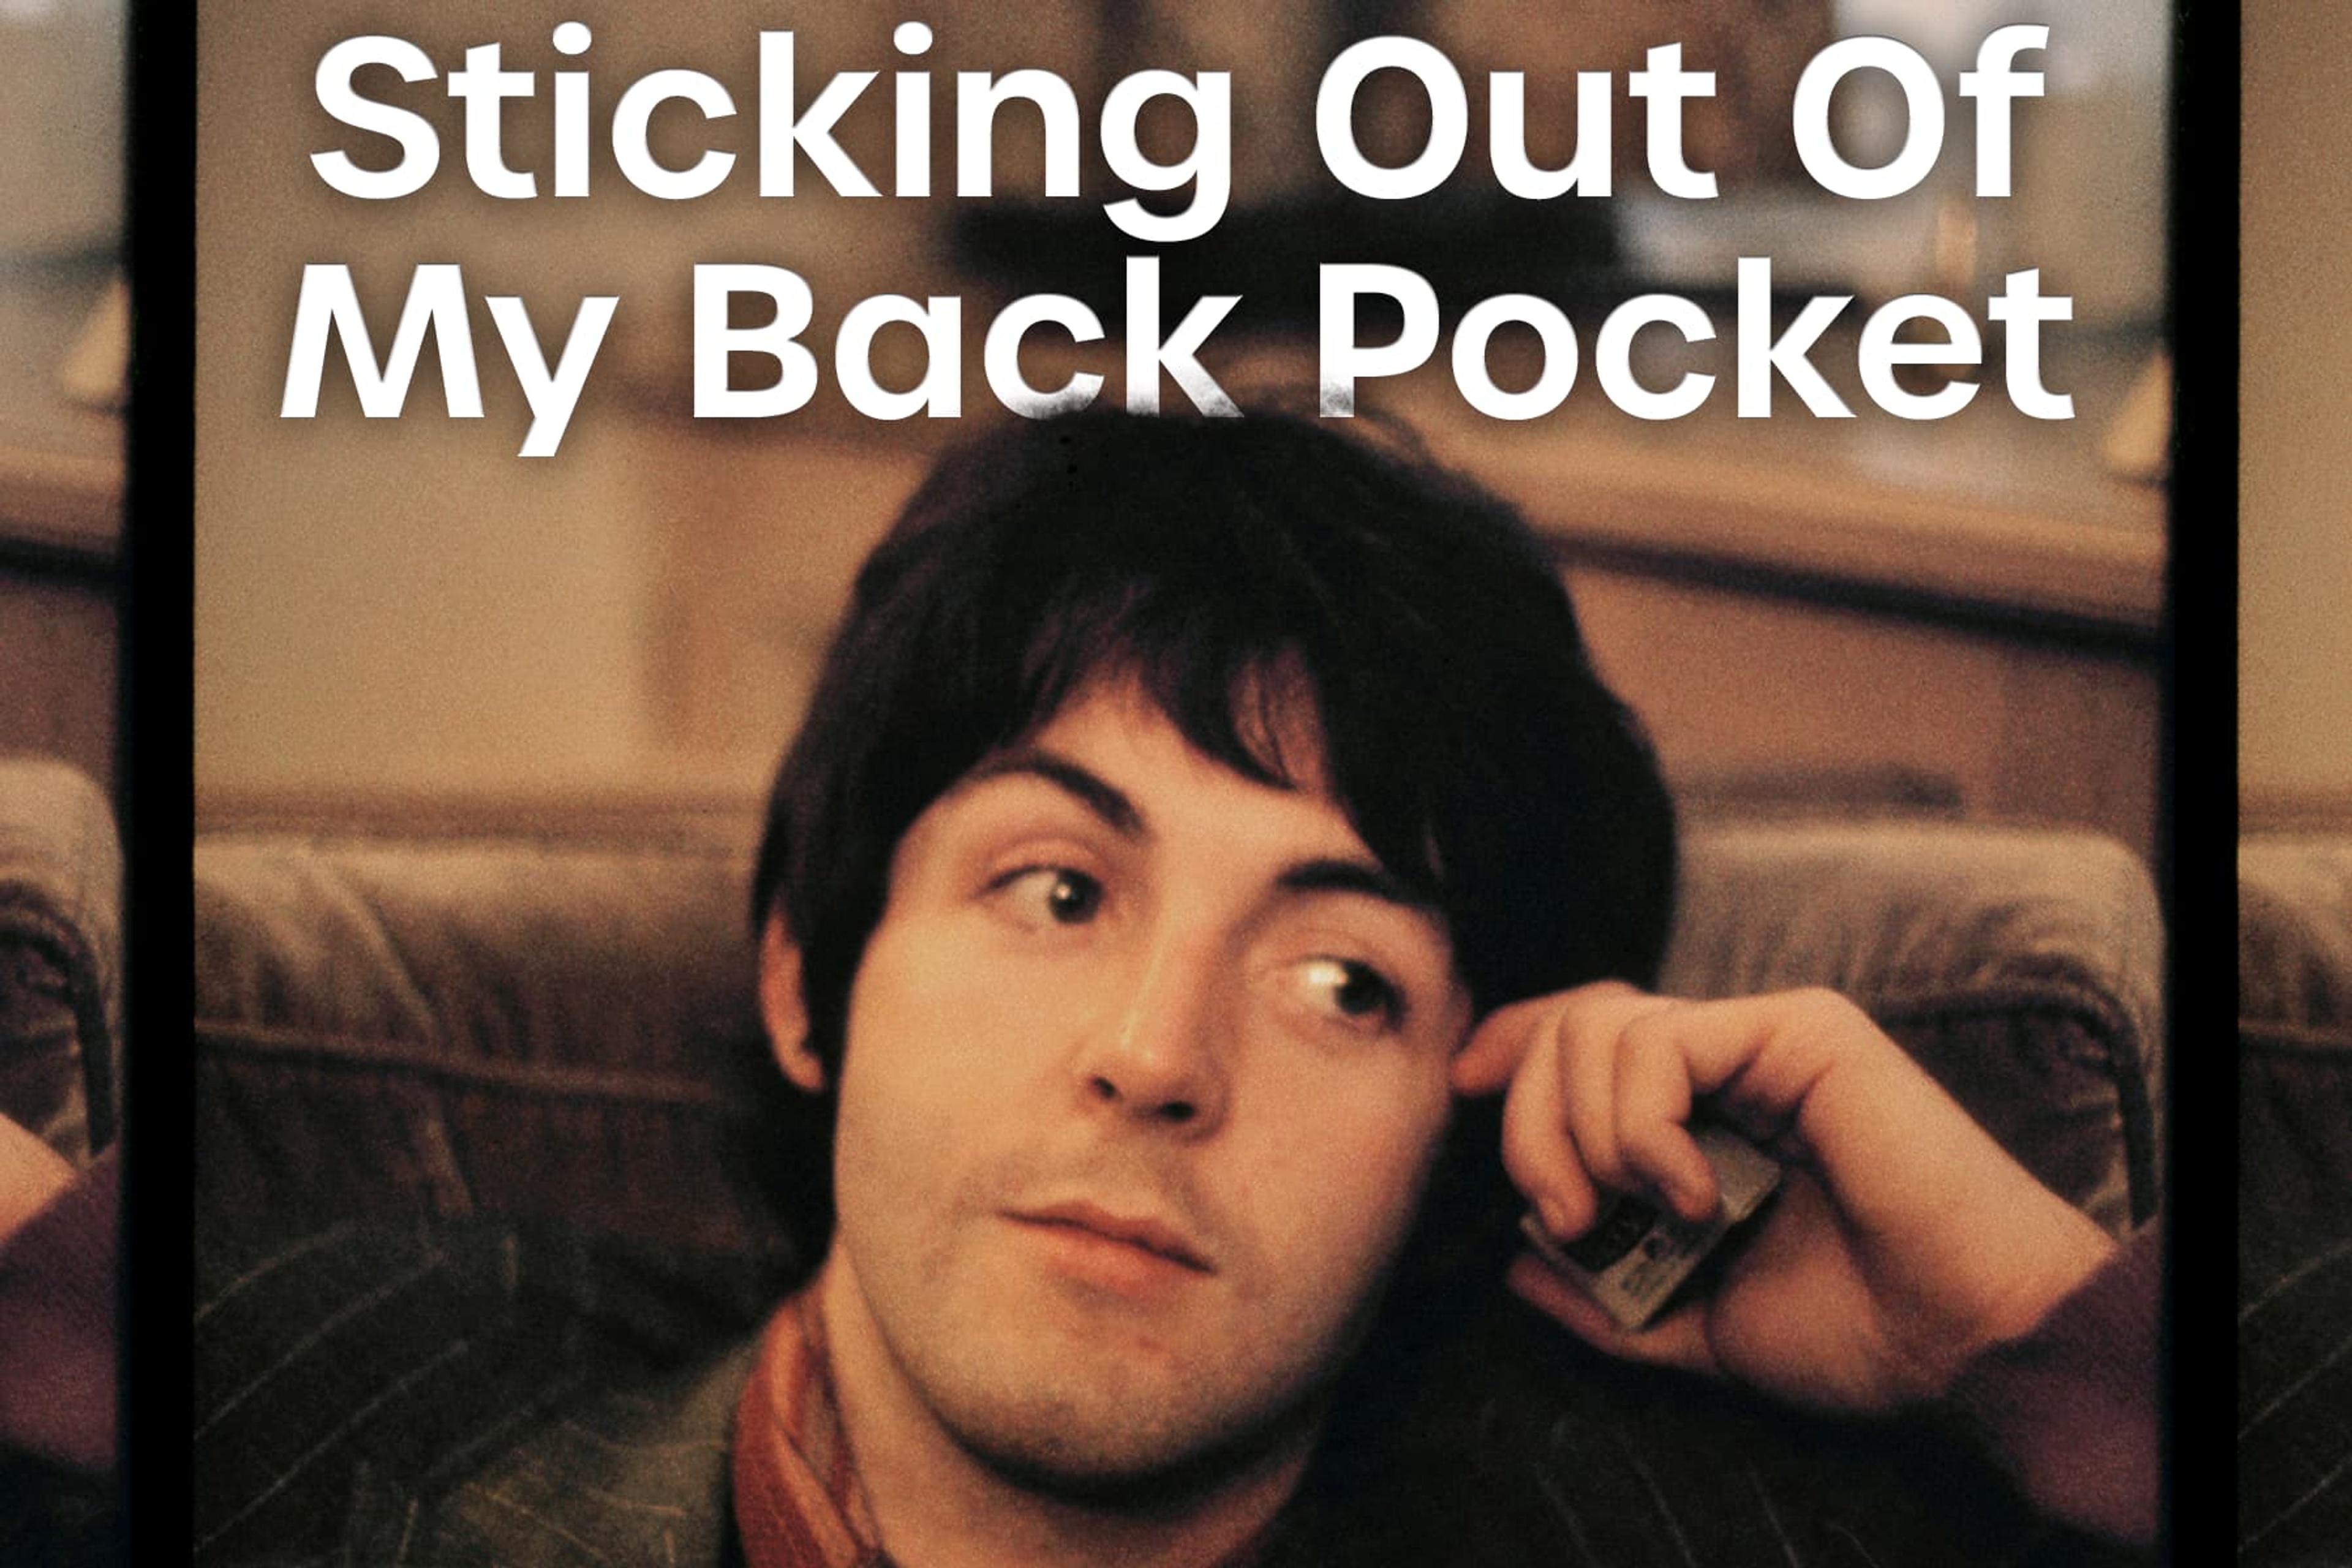 Photo of Paul McCartney taken by Linda McCartney with the logo for the monthly Spotify playlist 'Sticking Out Of My Back Pocket'